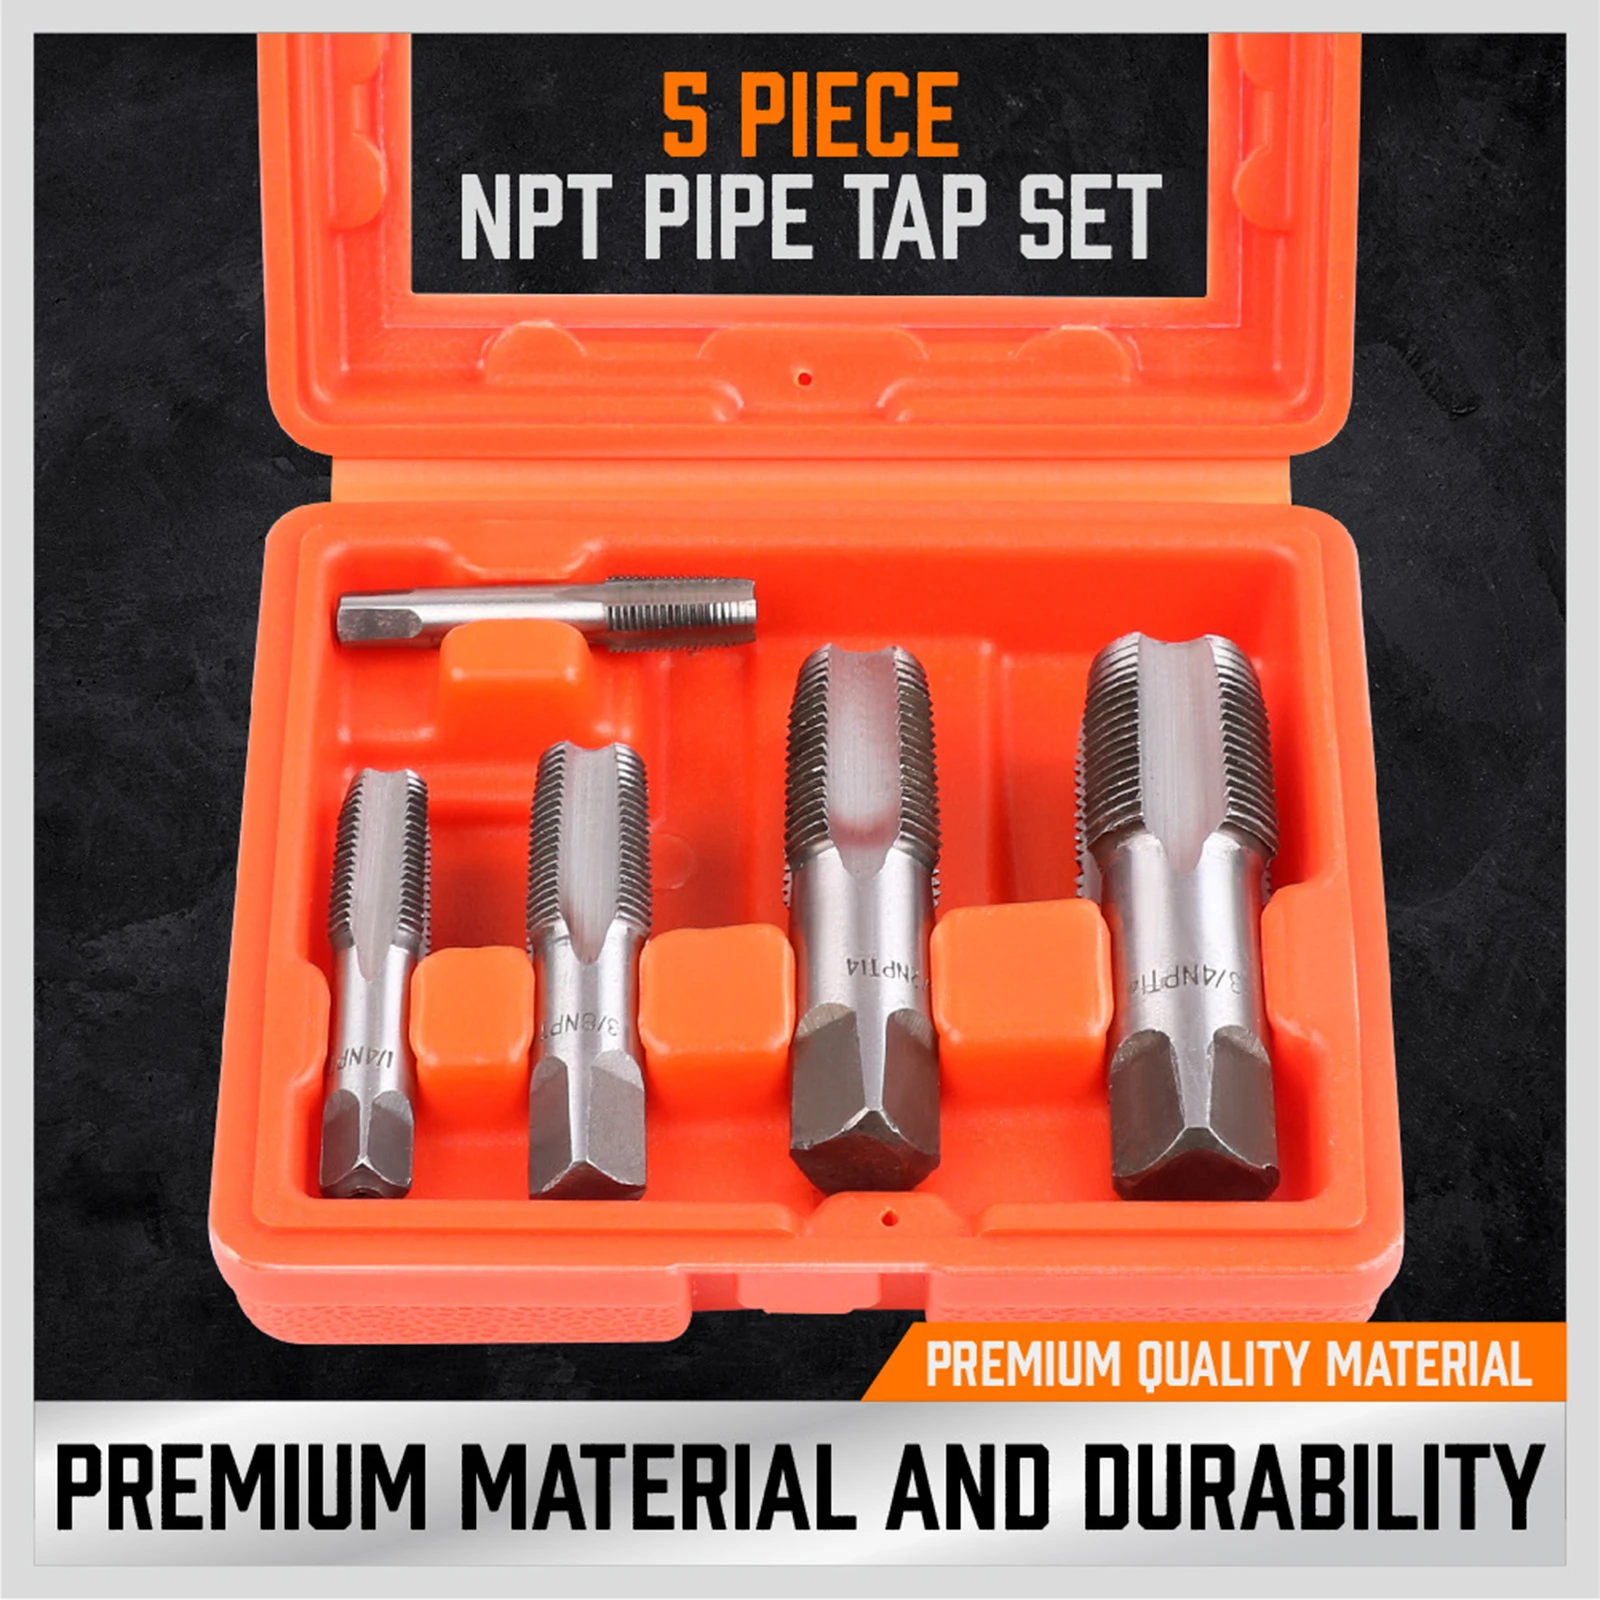 block plane home depot 5 Packs NPT Pipe Tap Set Thread Forming Taps Carbon Steel Clean Damaged Pipe Threads Steel Screw Extractor Damaged Bolt Remover jointer hand plane